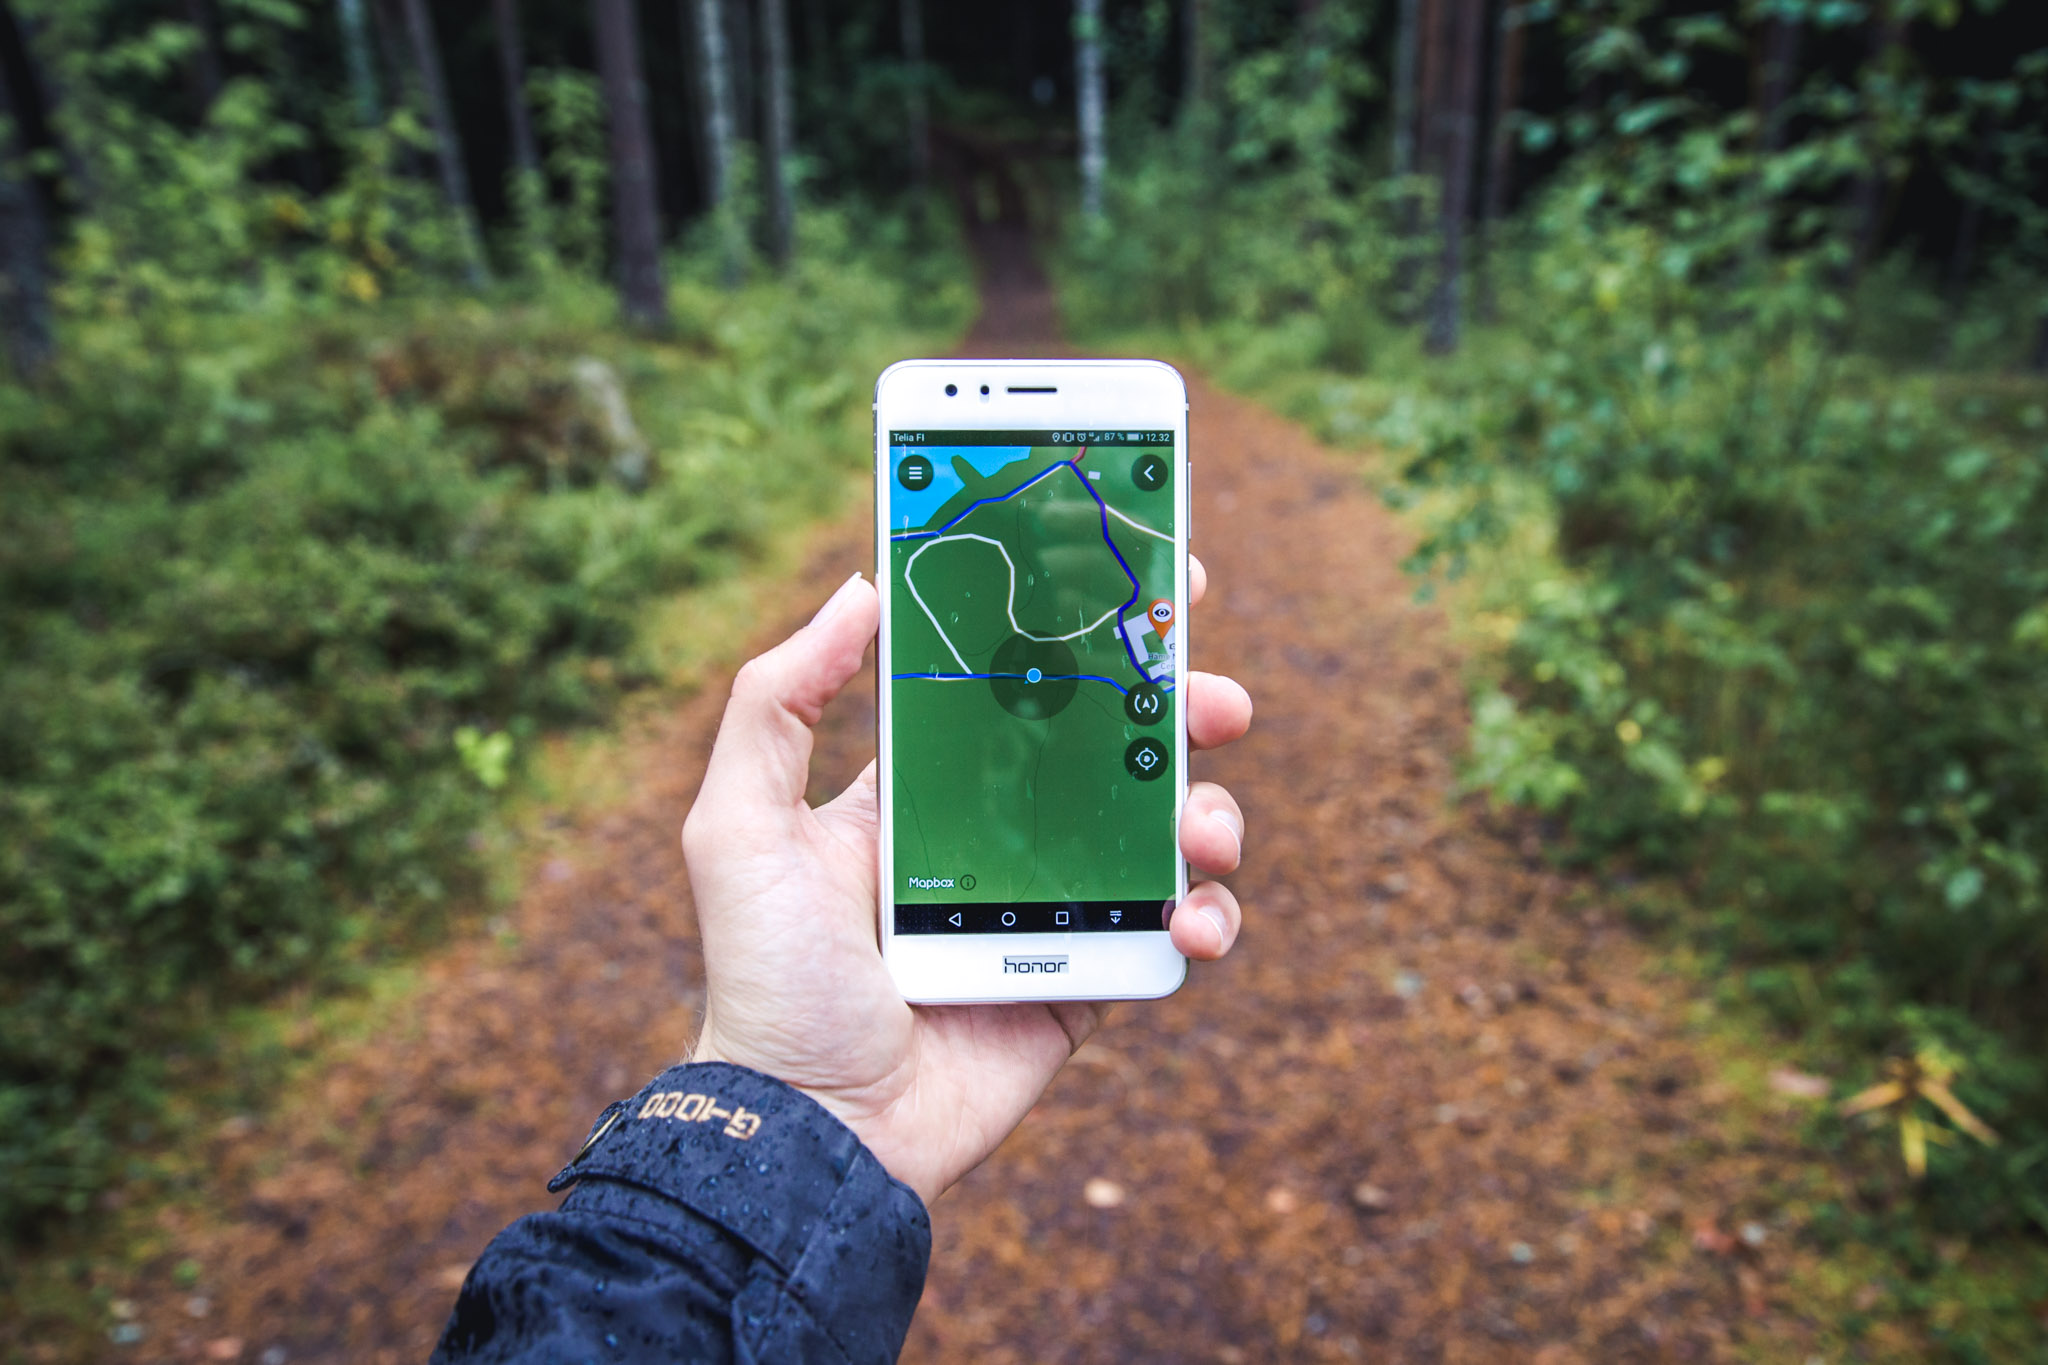 Ruostejärvi recreation area is a hit with the kids, particularly with a fun new mobile app to guide you on trails